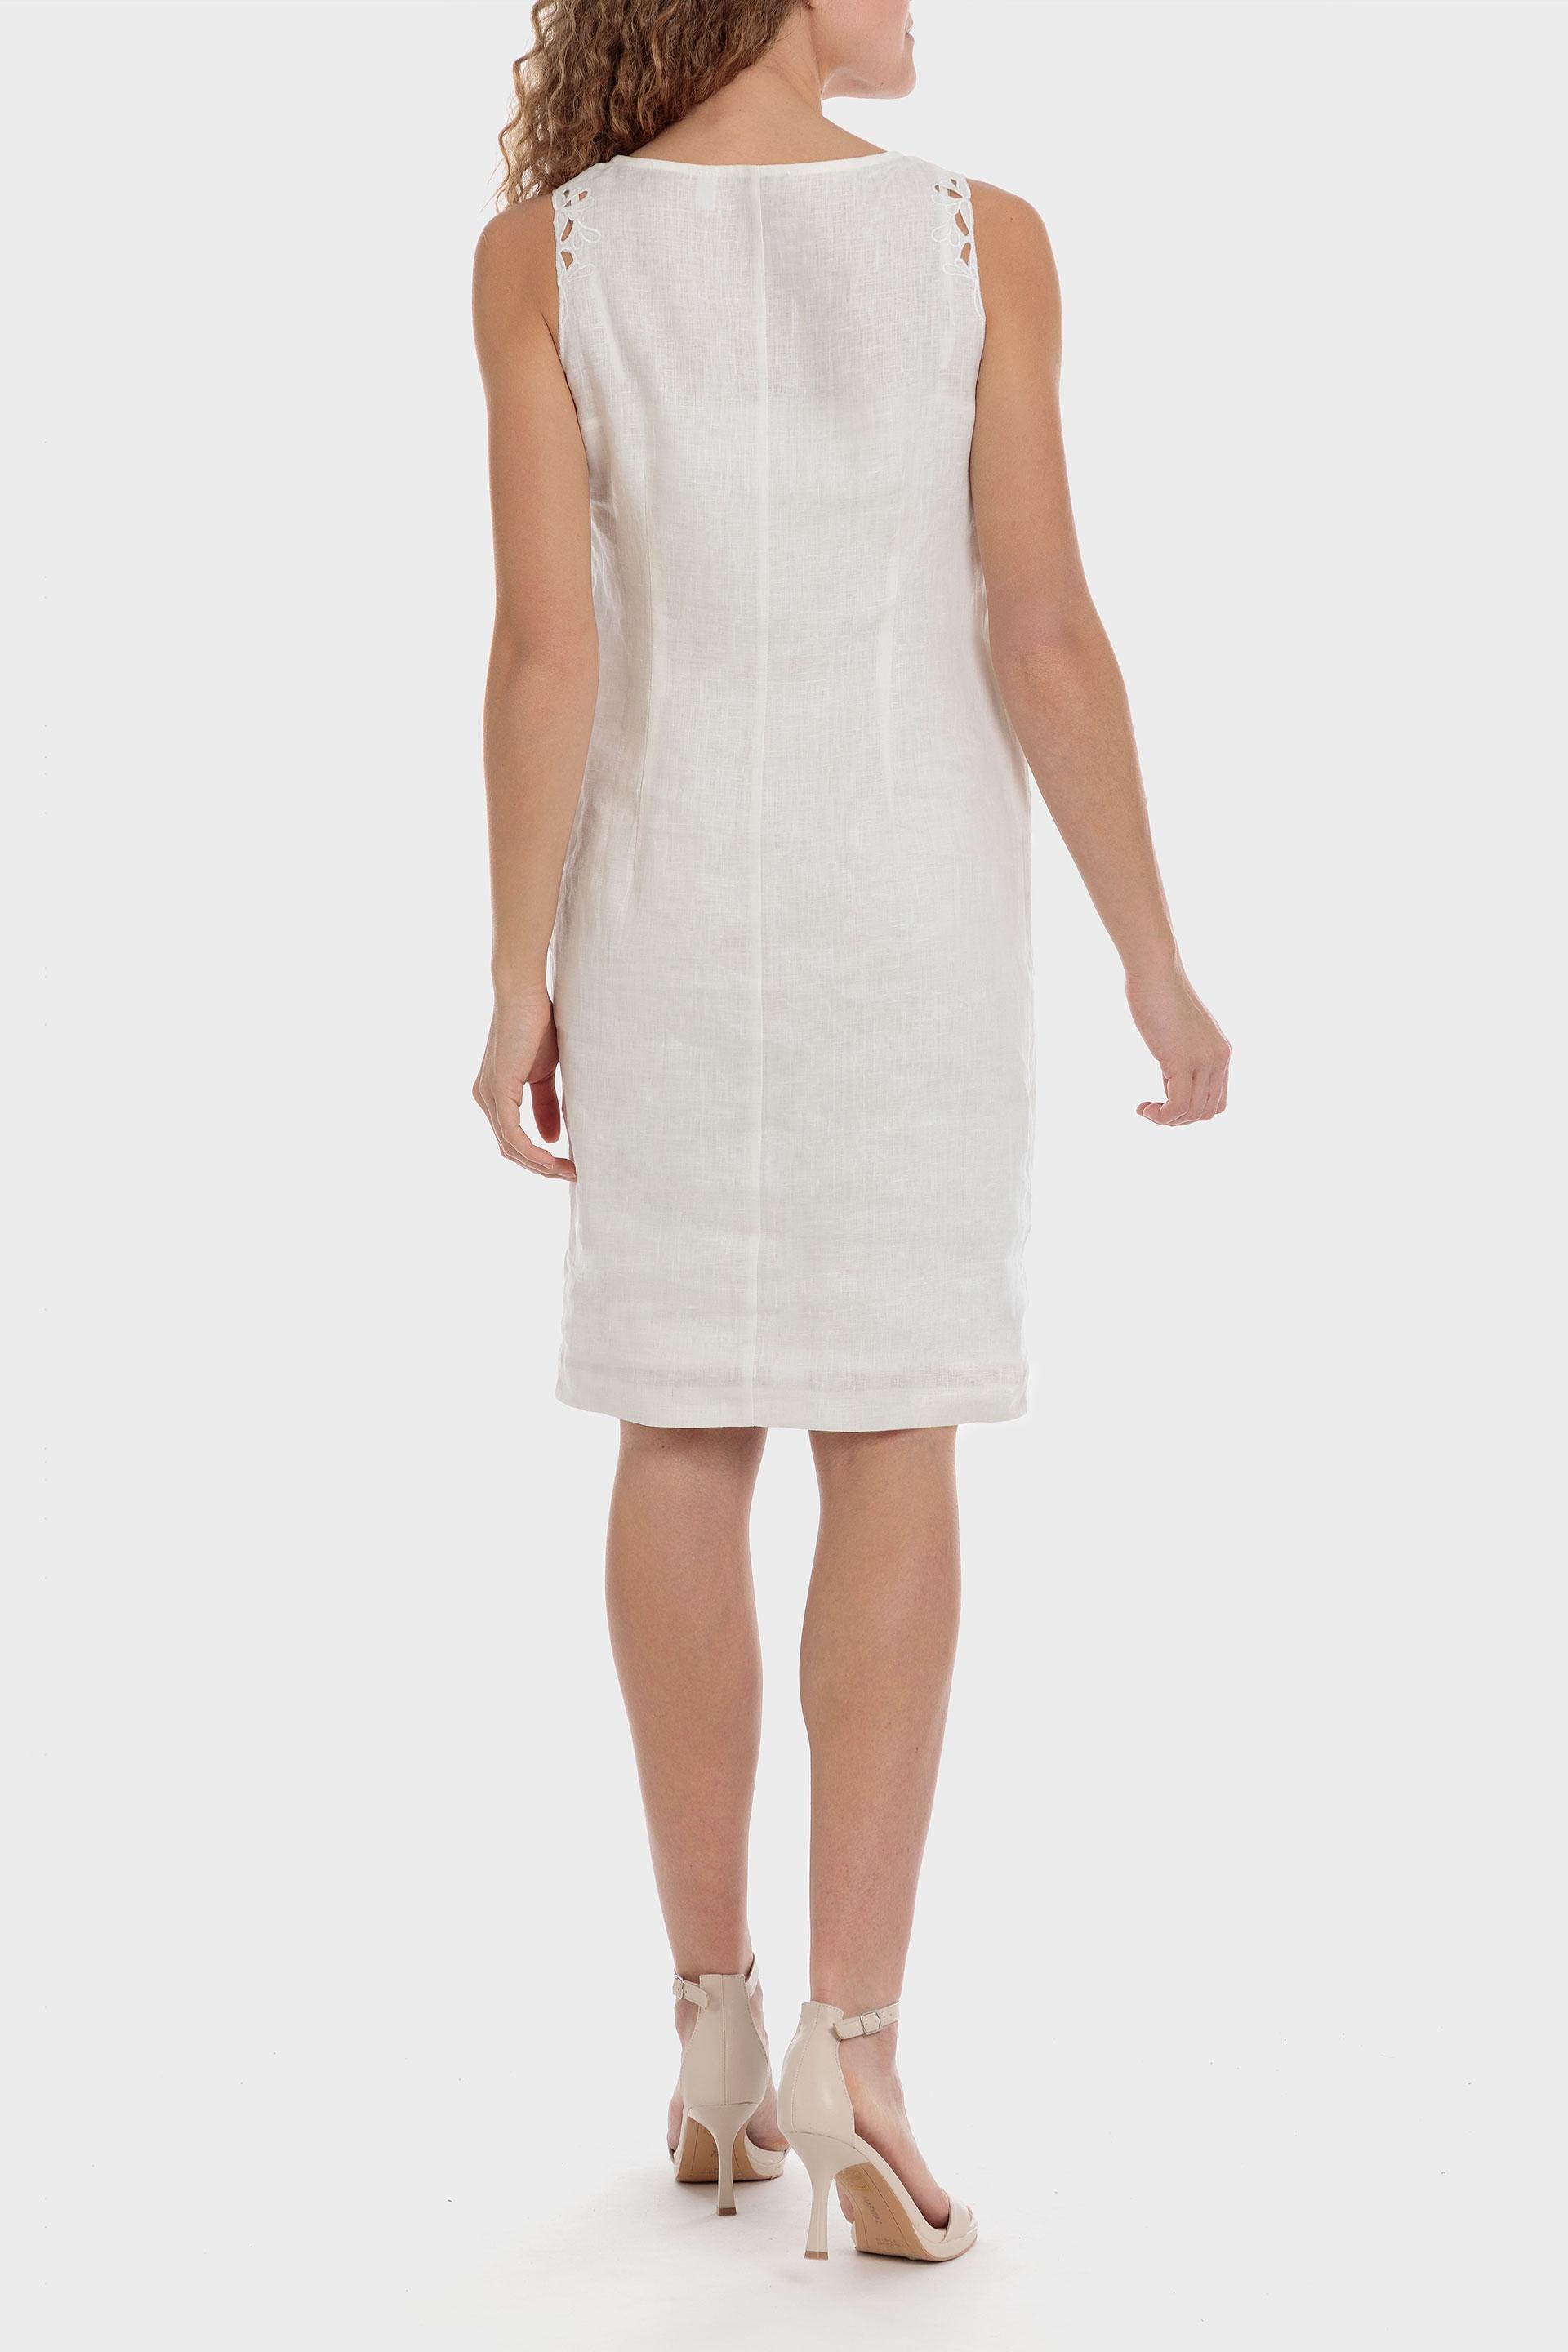 Punt Roma - White Long Embroidered Dress